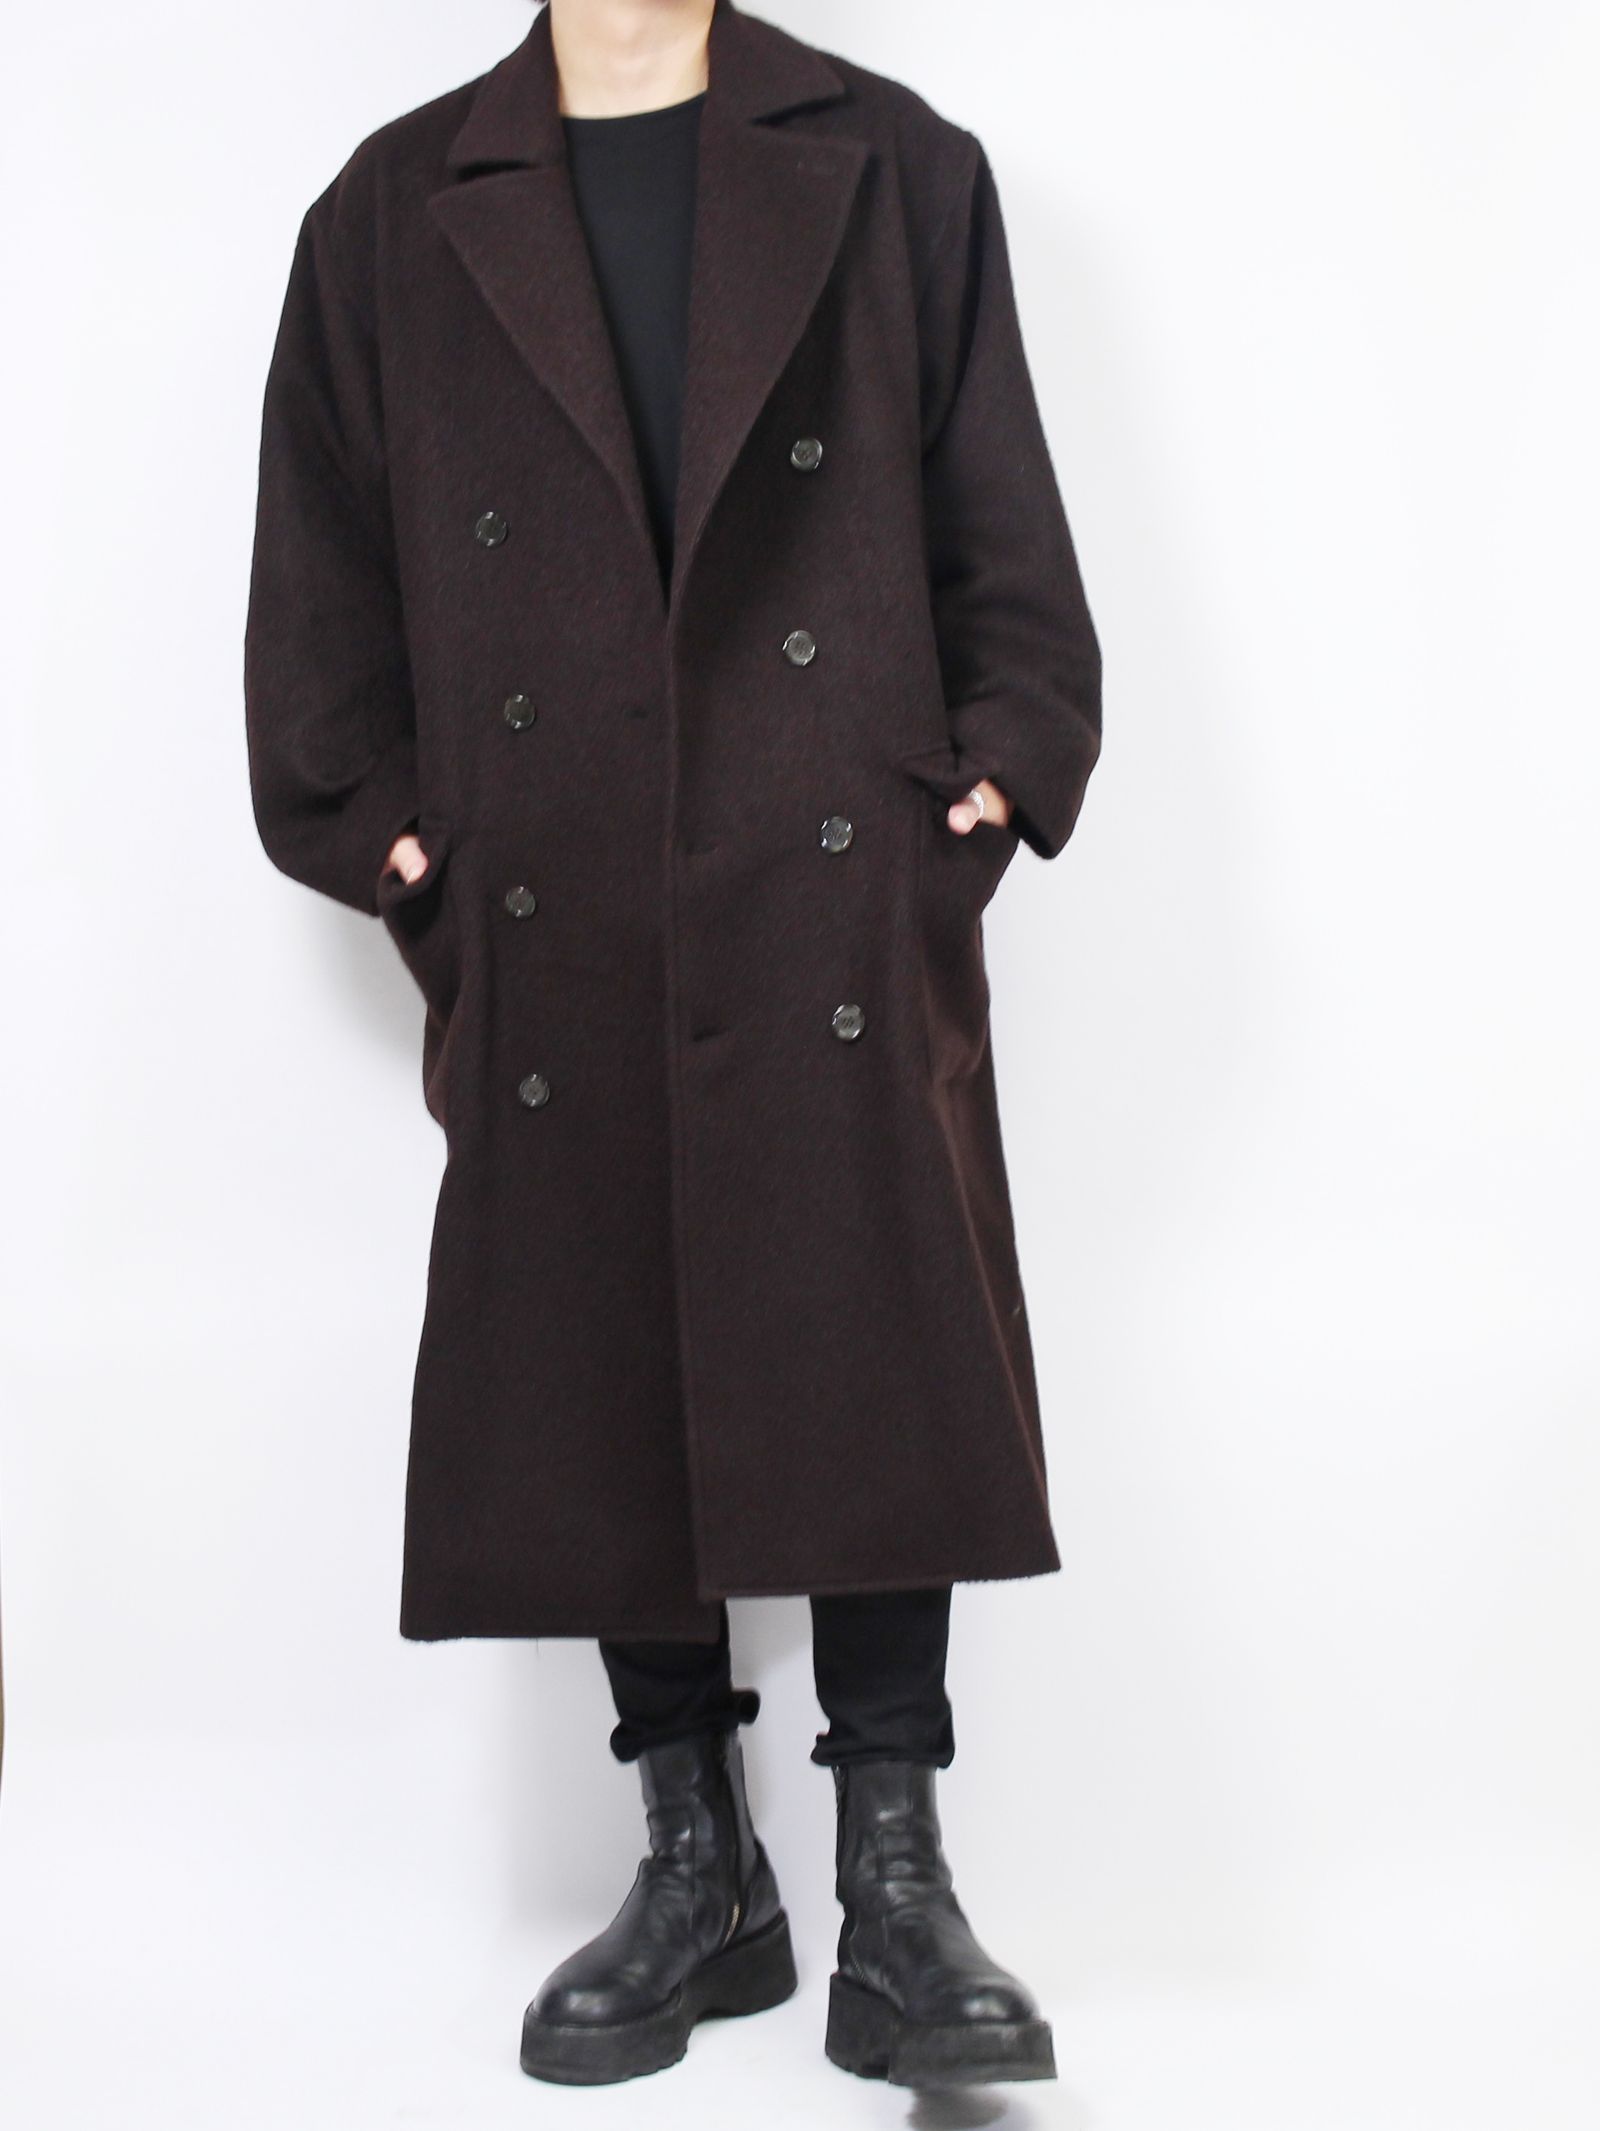 SEVEN BY SEVEN - ダブルチェスターコート - Double Chester coat